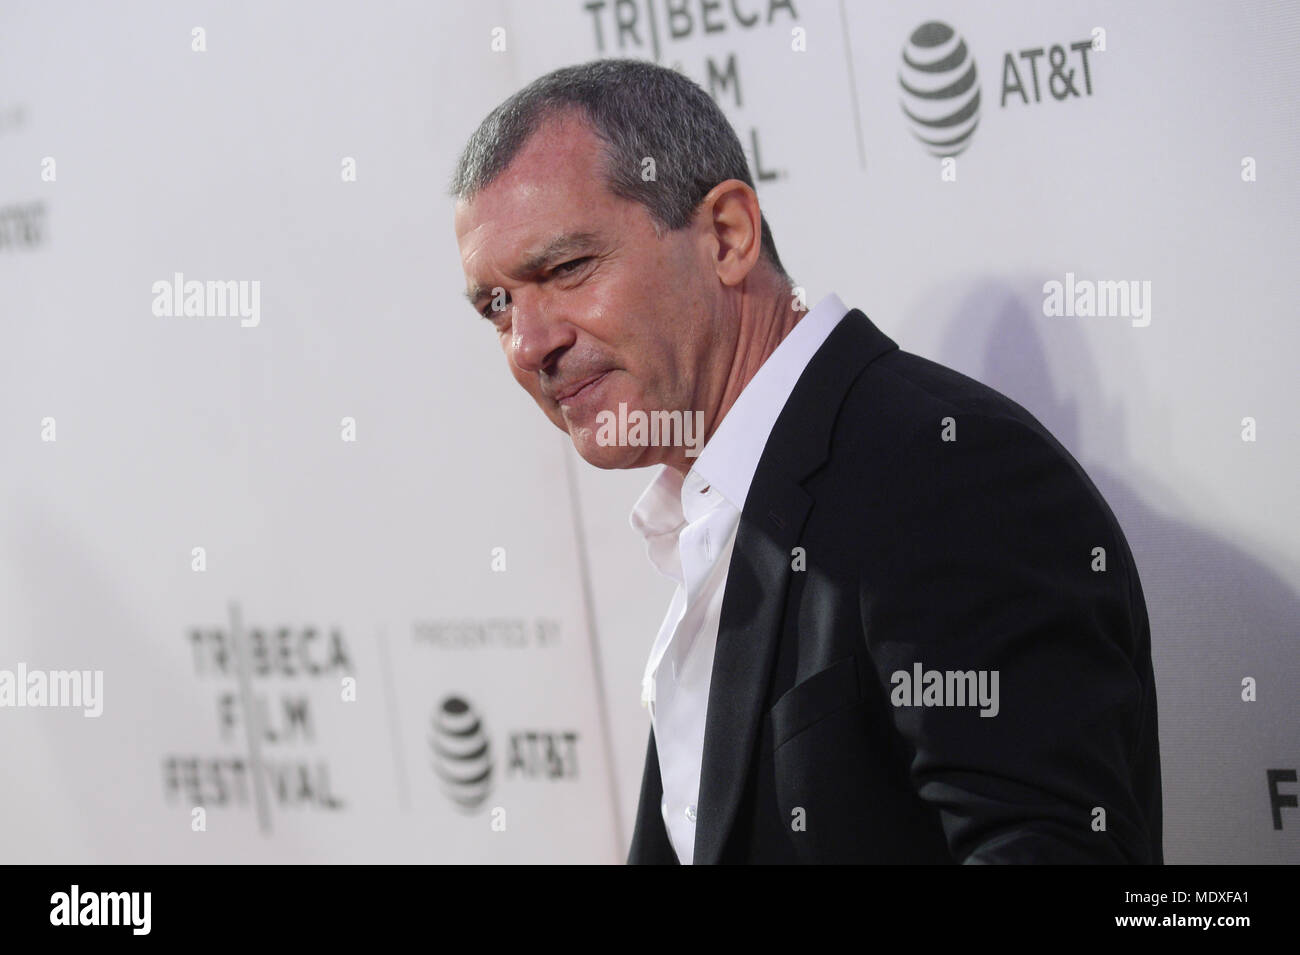 Antonio Banderas attends the National Geographic premiere screening of 'Genius: Picasso' on April 20, 2018 at the Tribeca Film Festival in New York City. Credit: Erik Pendzich/Alamy Live News Stock Photo